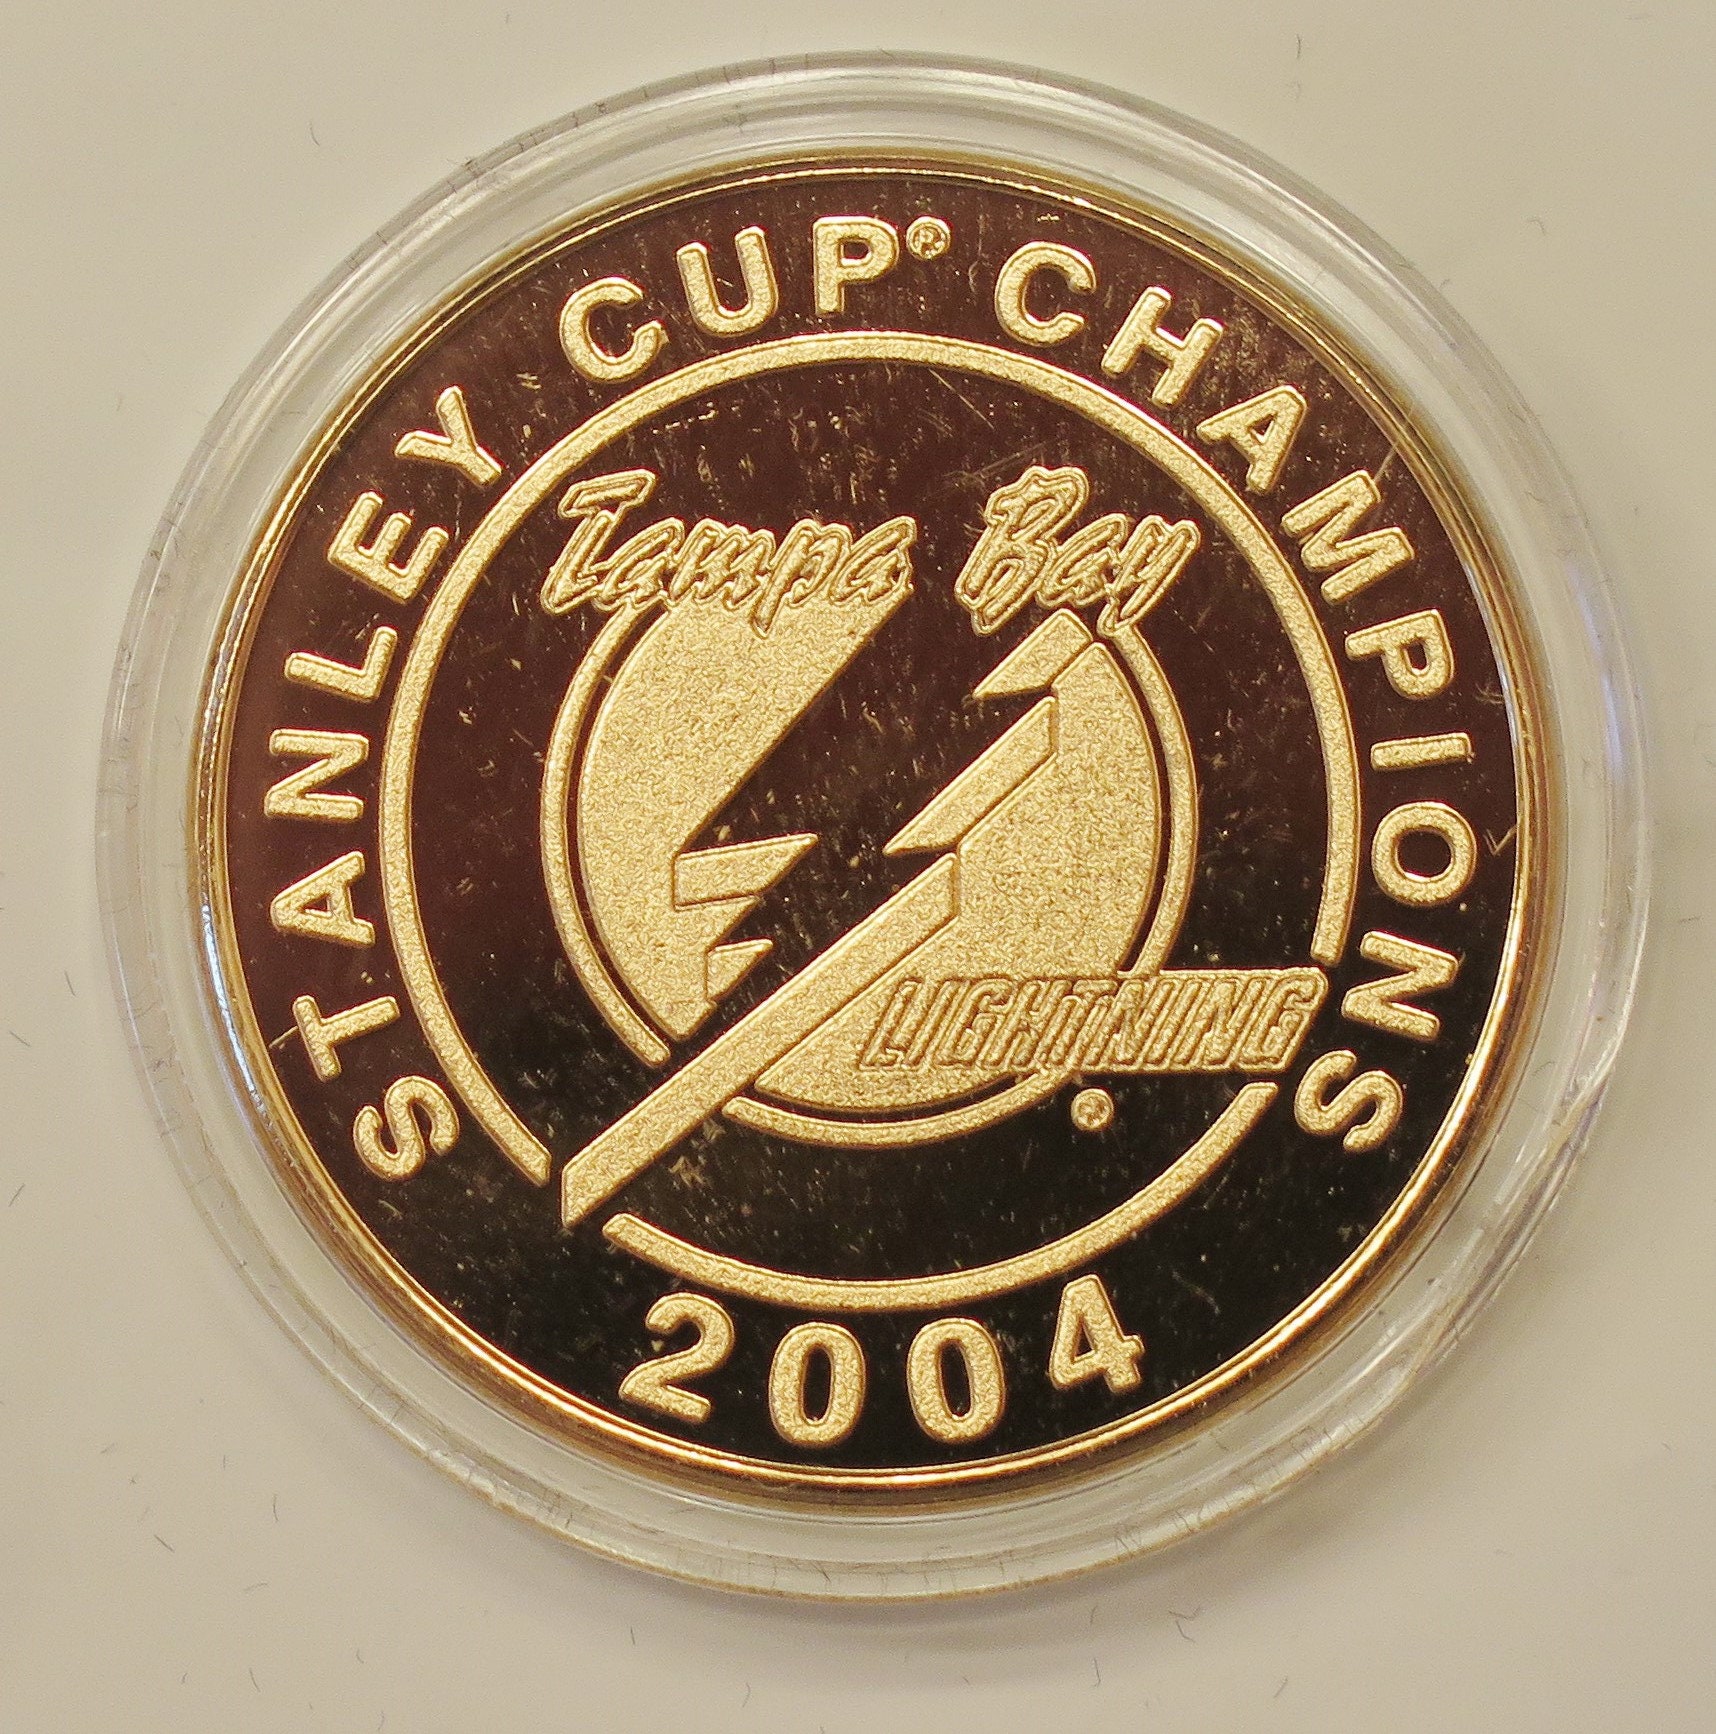 Tampa Bay Lightning 32 oz Coca Cola Cup 2004 Champions Stanley Cup